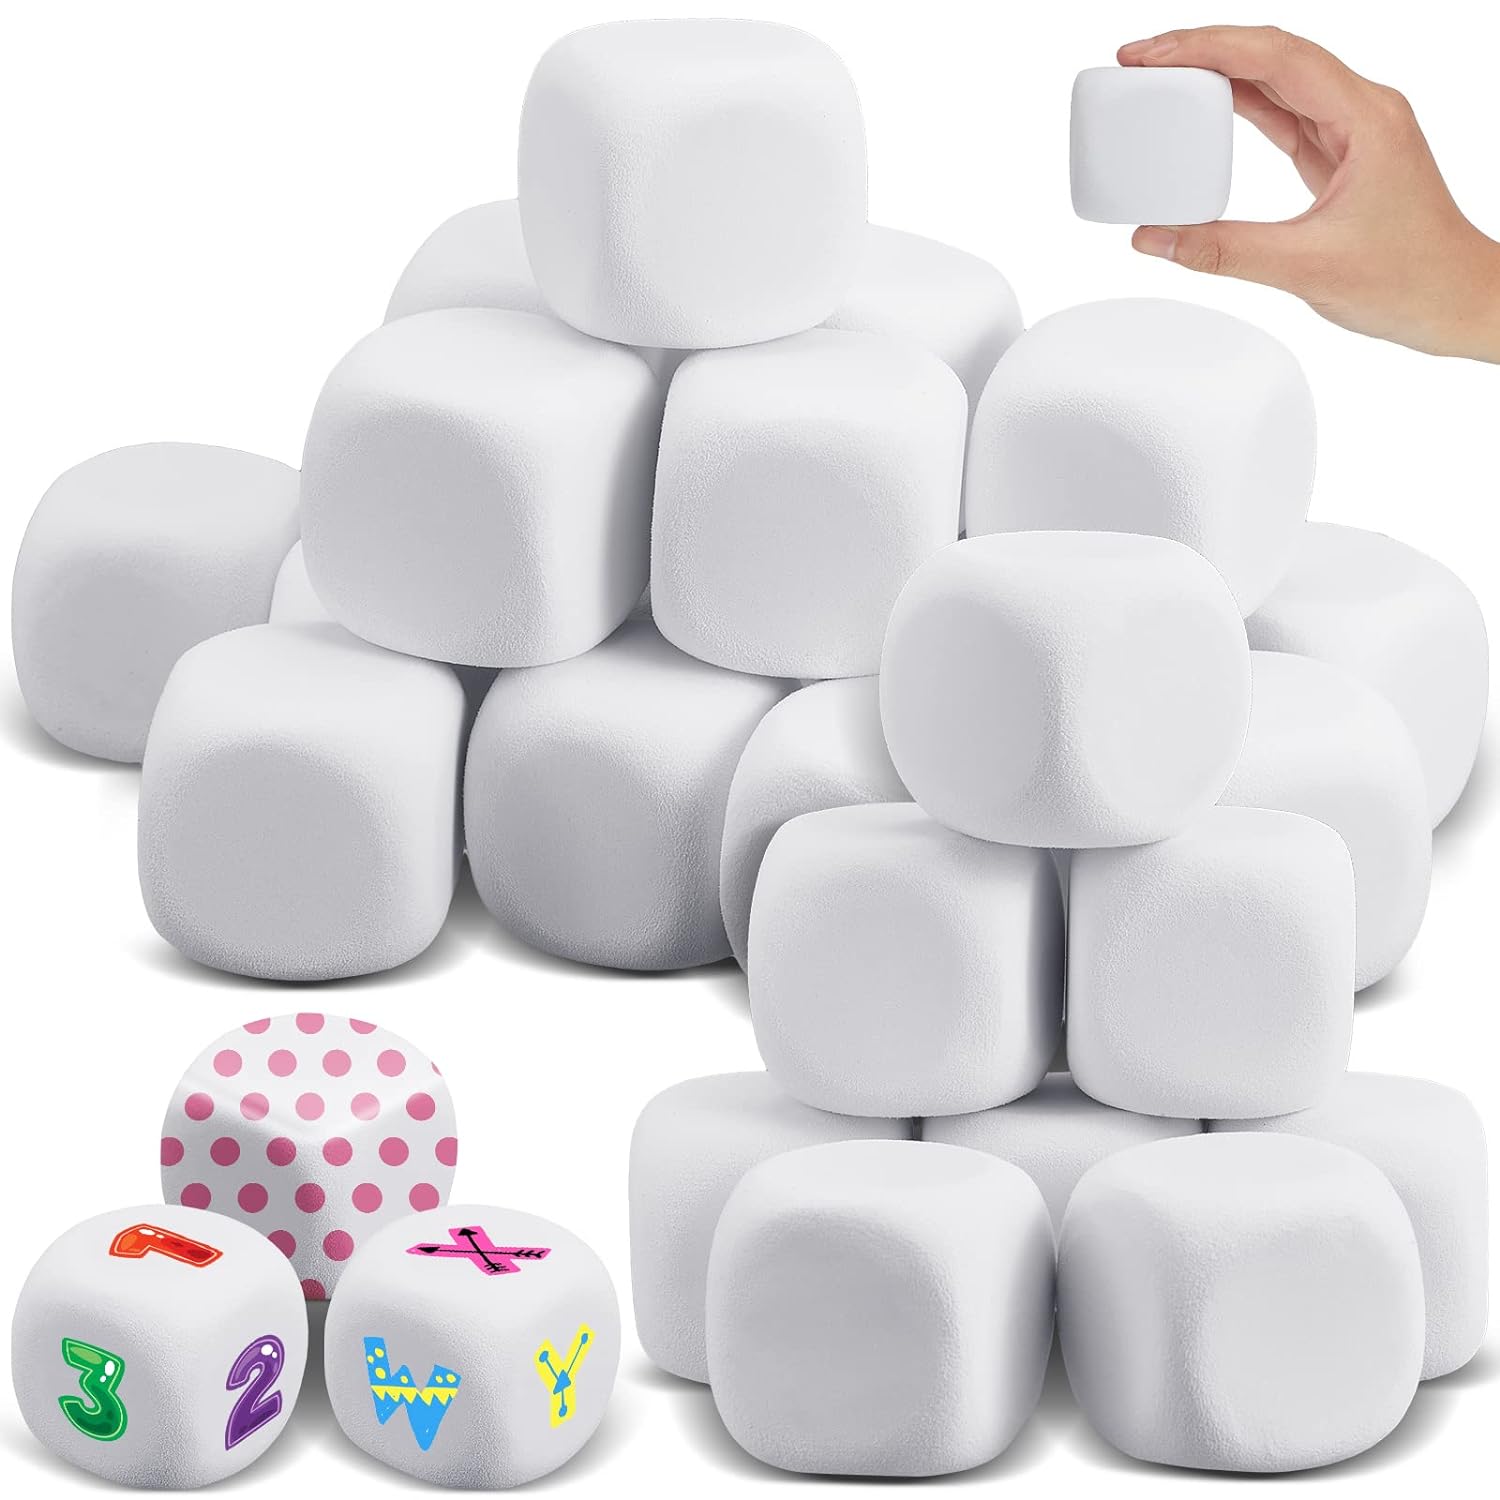 Great Choice Products 50 Pcs White Blank Dice Eva Foam Dice 1.96 Inch Graffiti Foam Blocks For Crafts Building Foam Cubes For Crafting Game Co?